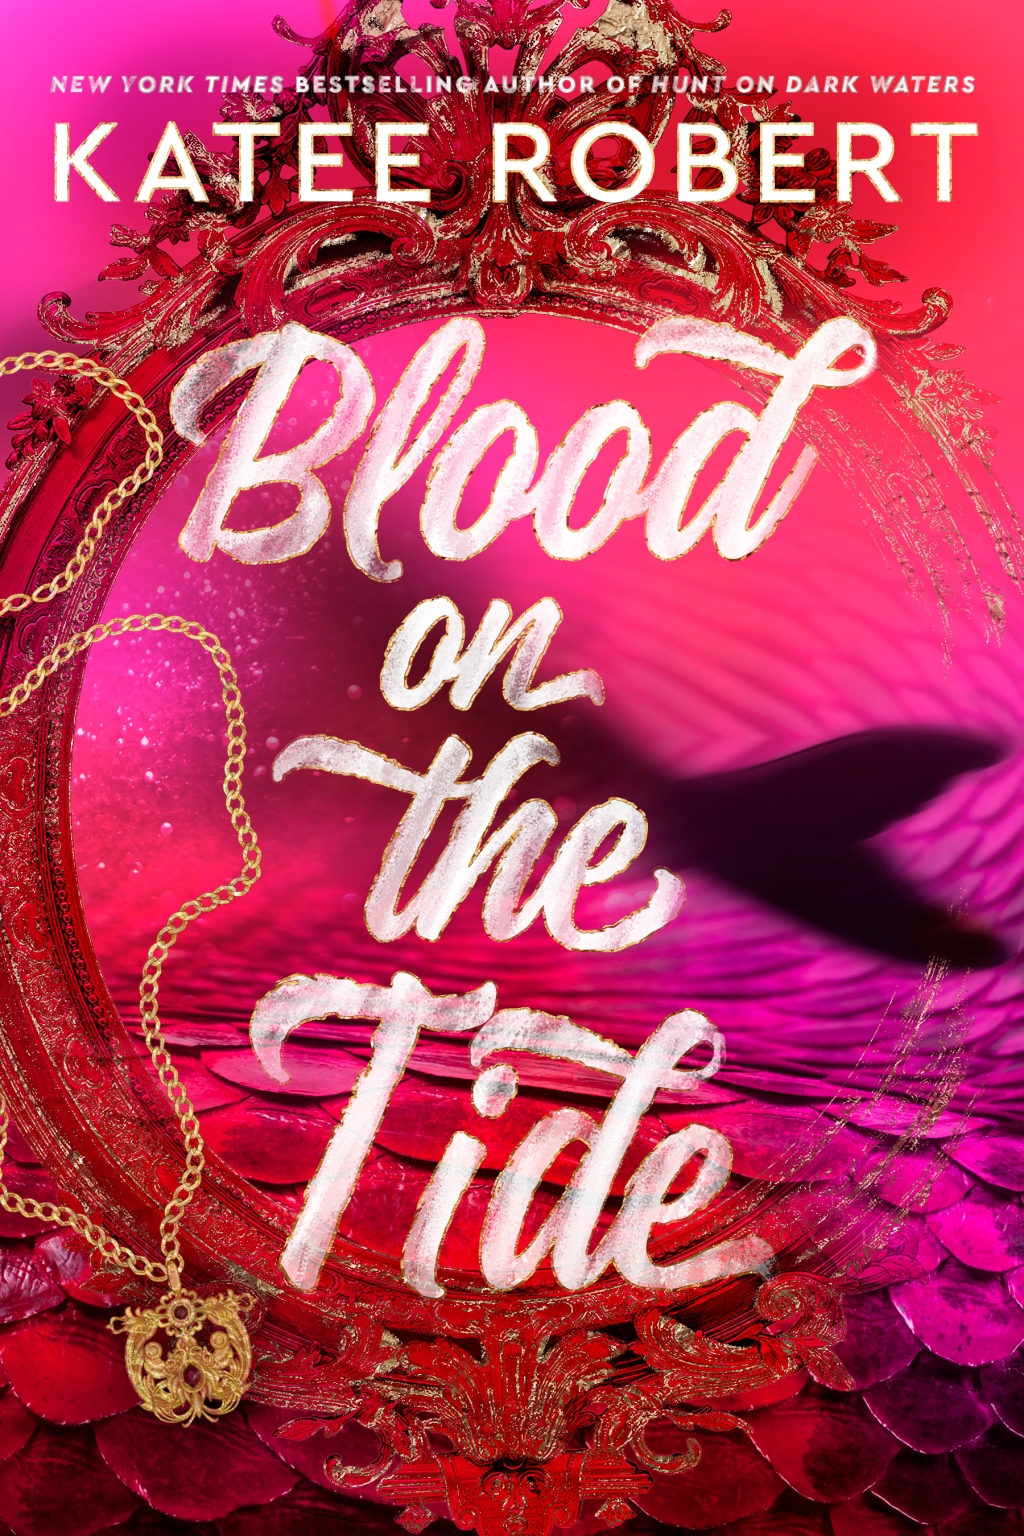 Book Review: Blood on the Tide by Katee Robert (romance)